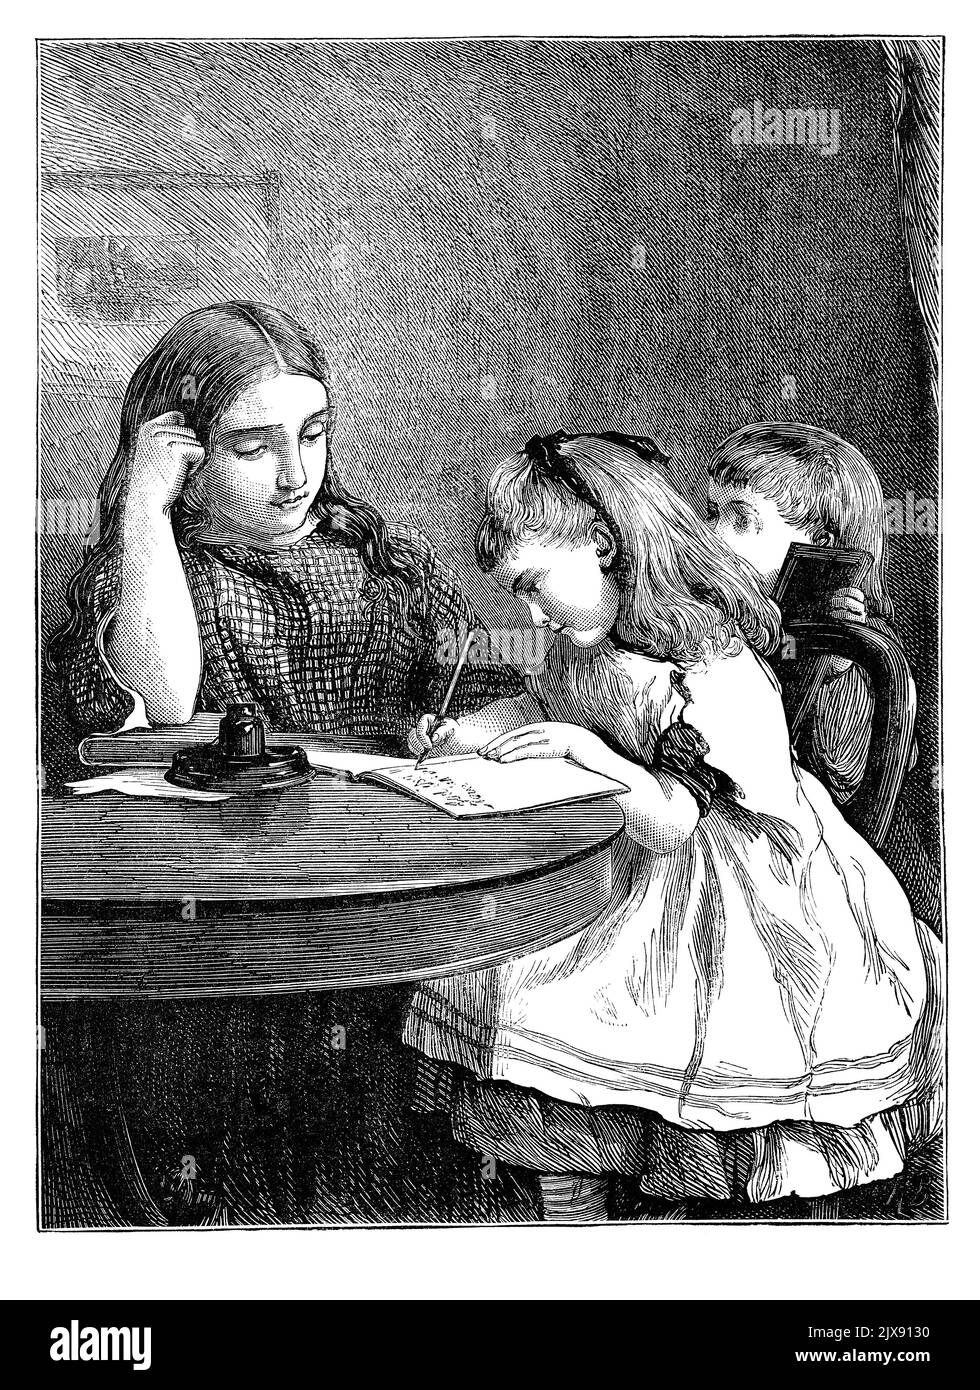 1872 vintage Victorian engraving of a writing lesson. A young girl practises her letters while her teacher looks on. Stock Photo